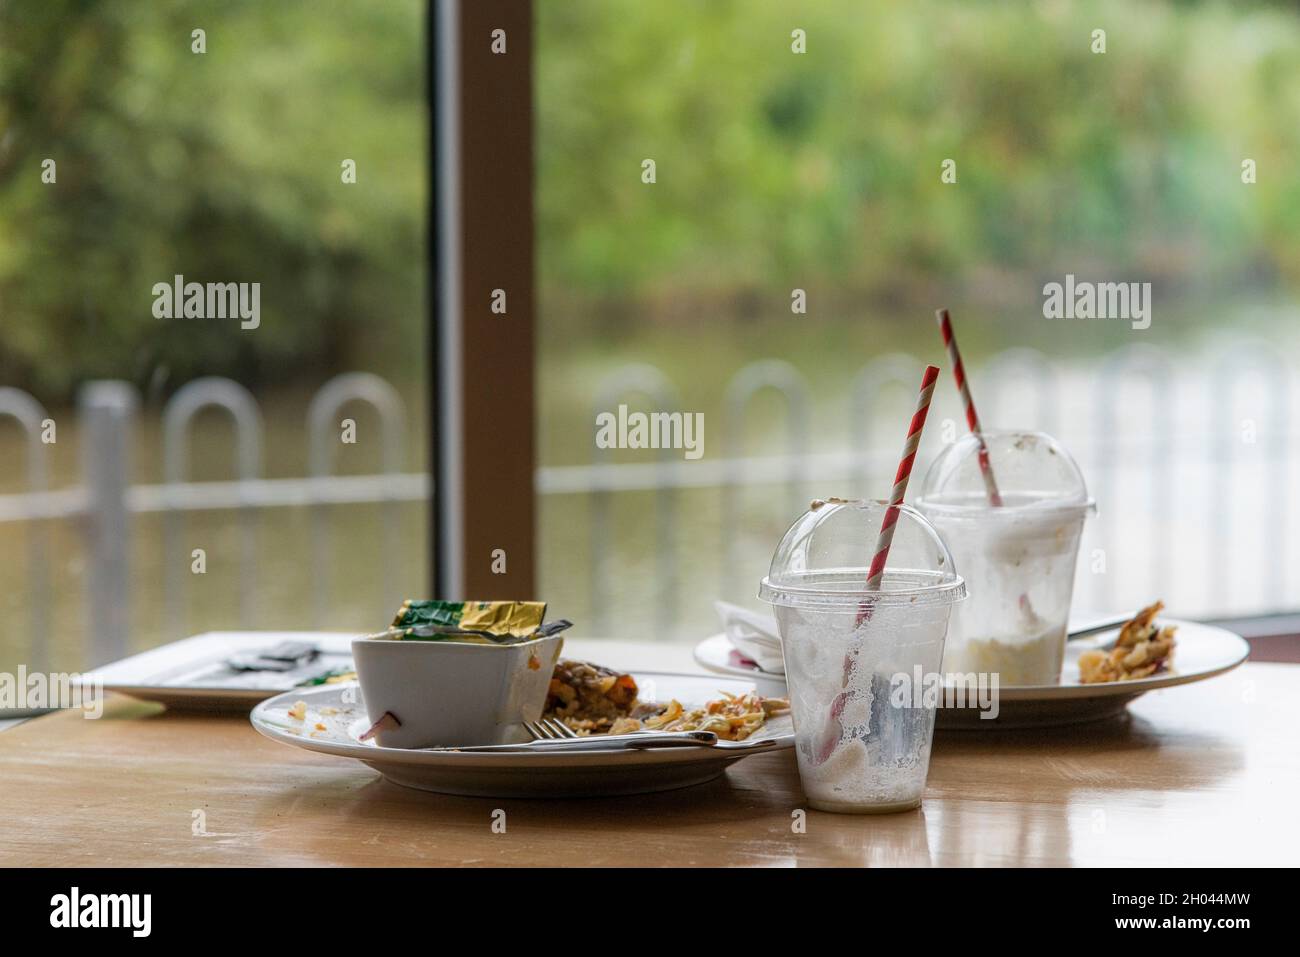 The remains of a meal on a restaurant table. Stock Photo